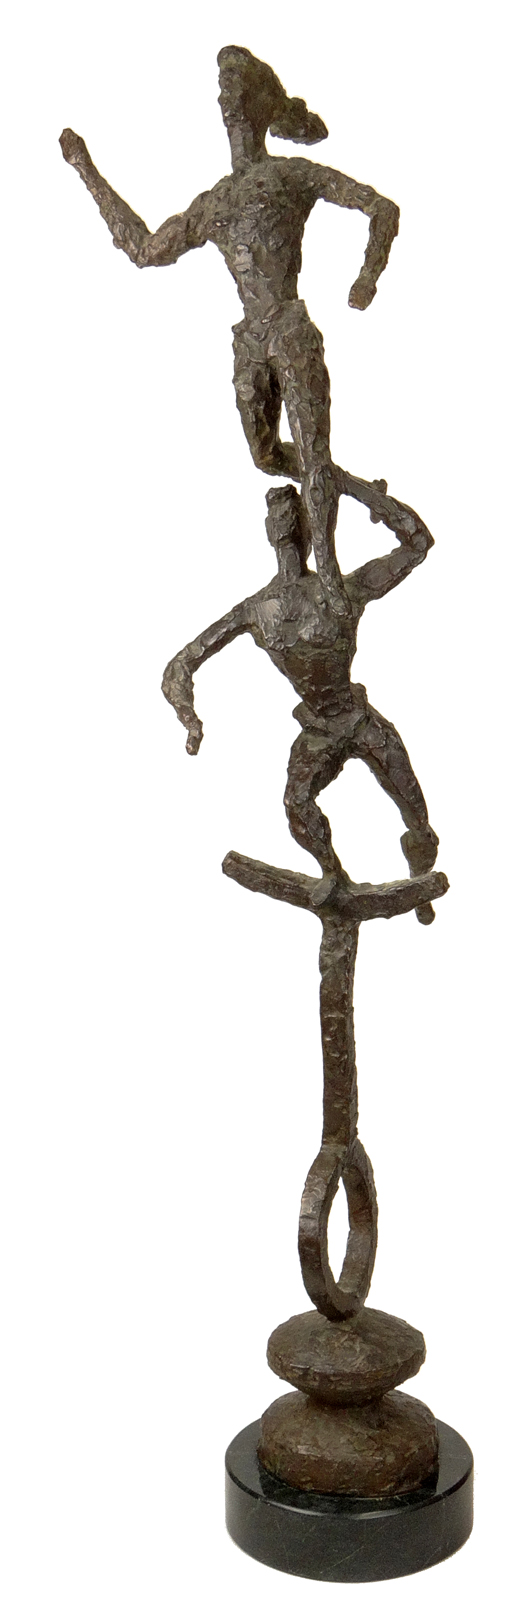 Chaim Gross (American, 1904-1991) ‘Two on a Unicycle,’ bronze sculpture on onyx base. Price realized: $5,664. Kodner Galleries image.